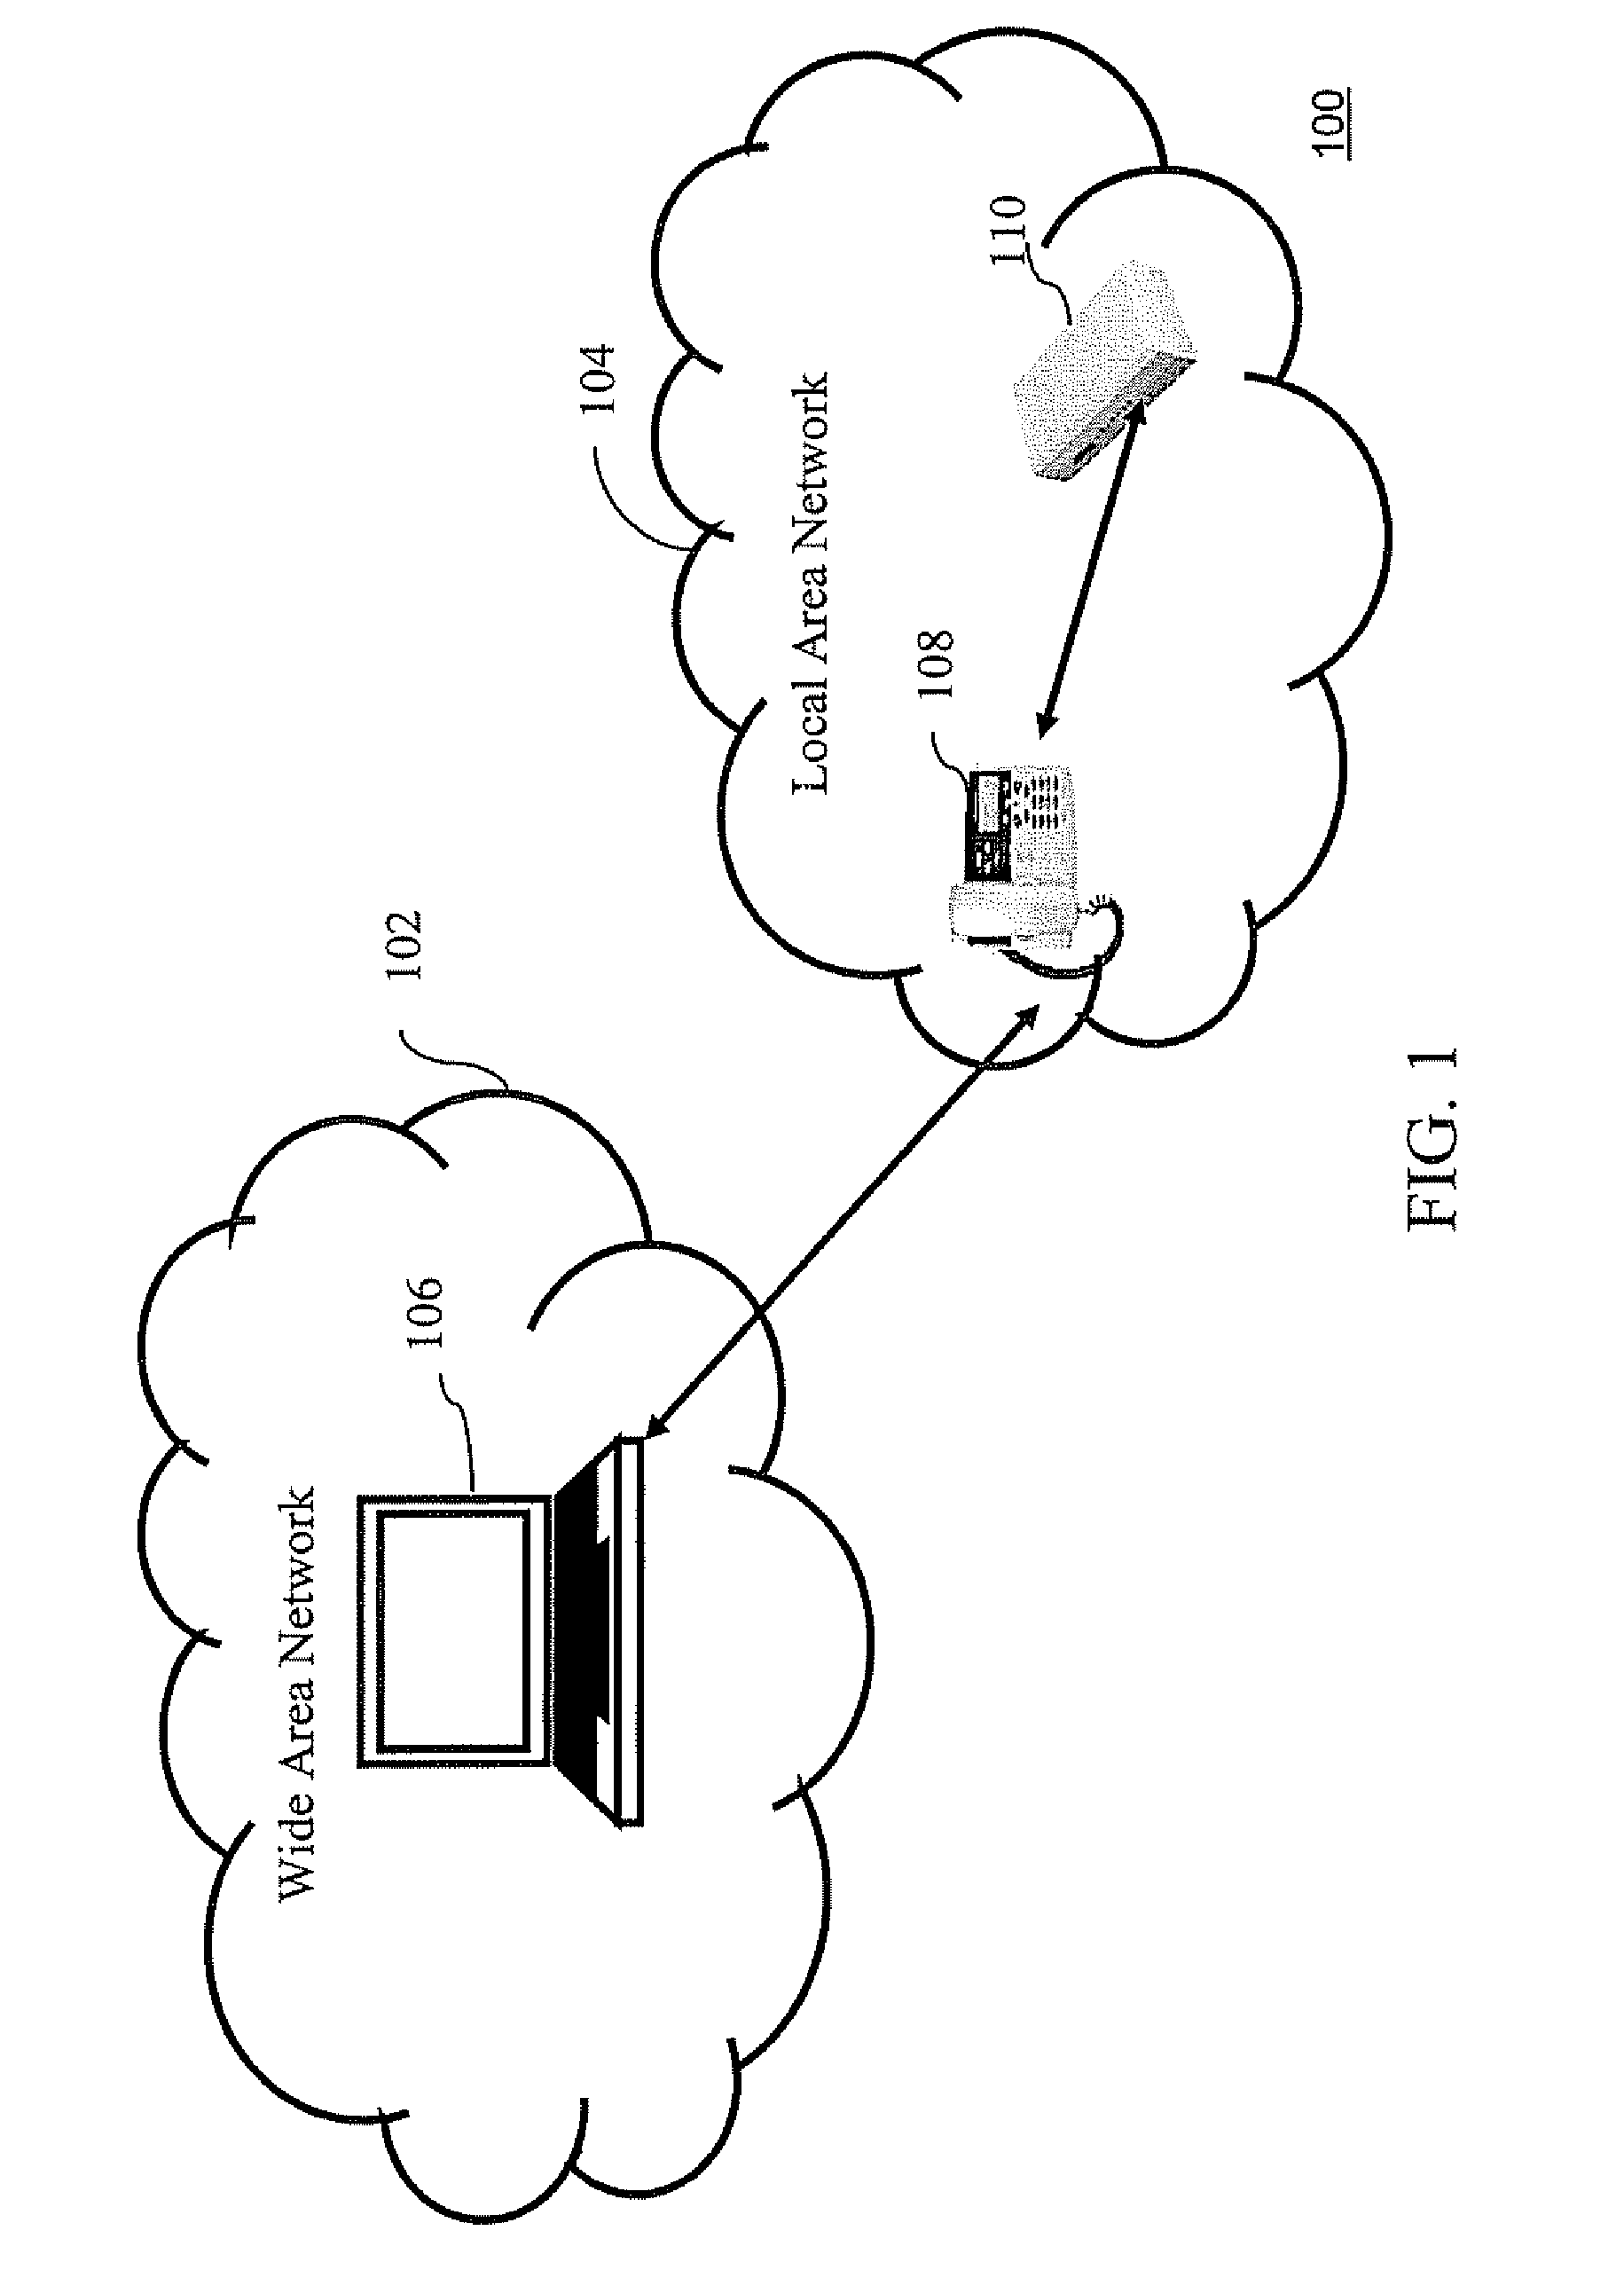 System authorizing a remote agent using a temporary password to manage configuration settings of a device and invalidating it after a fixed time interval